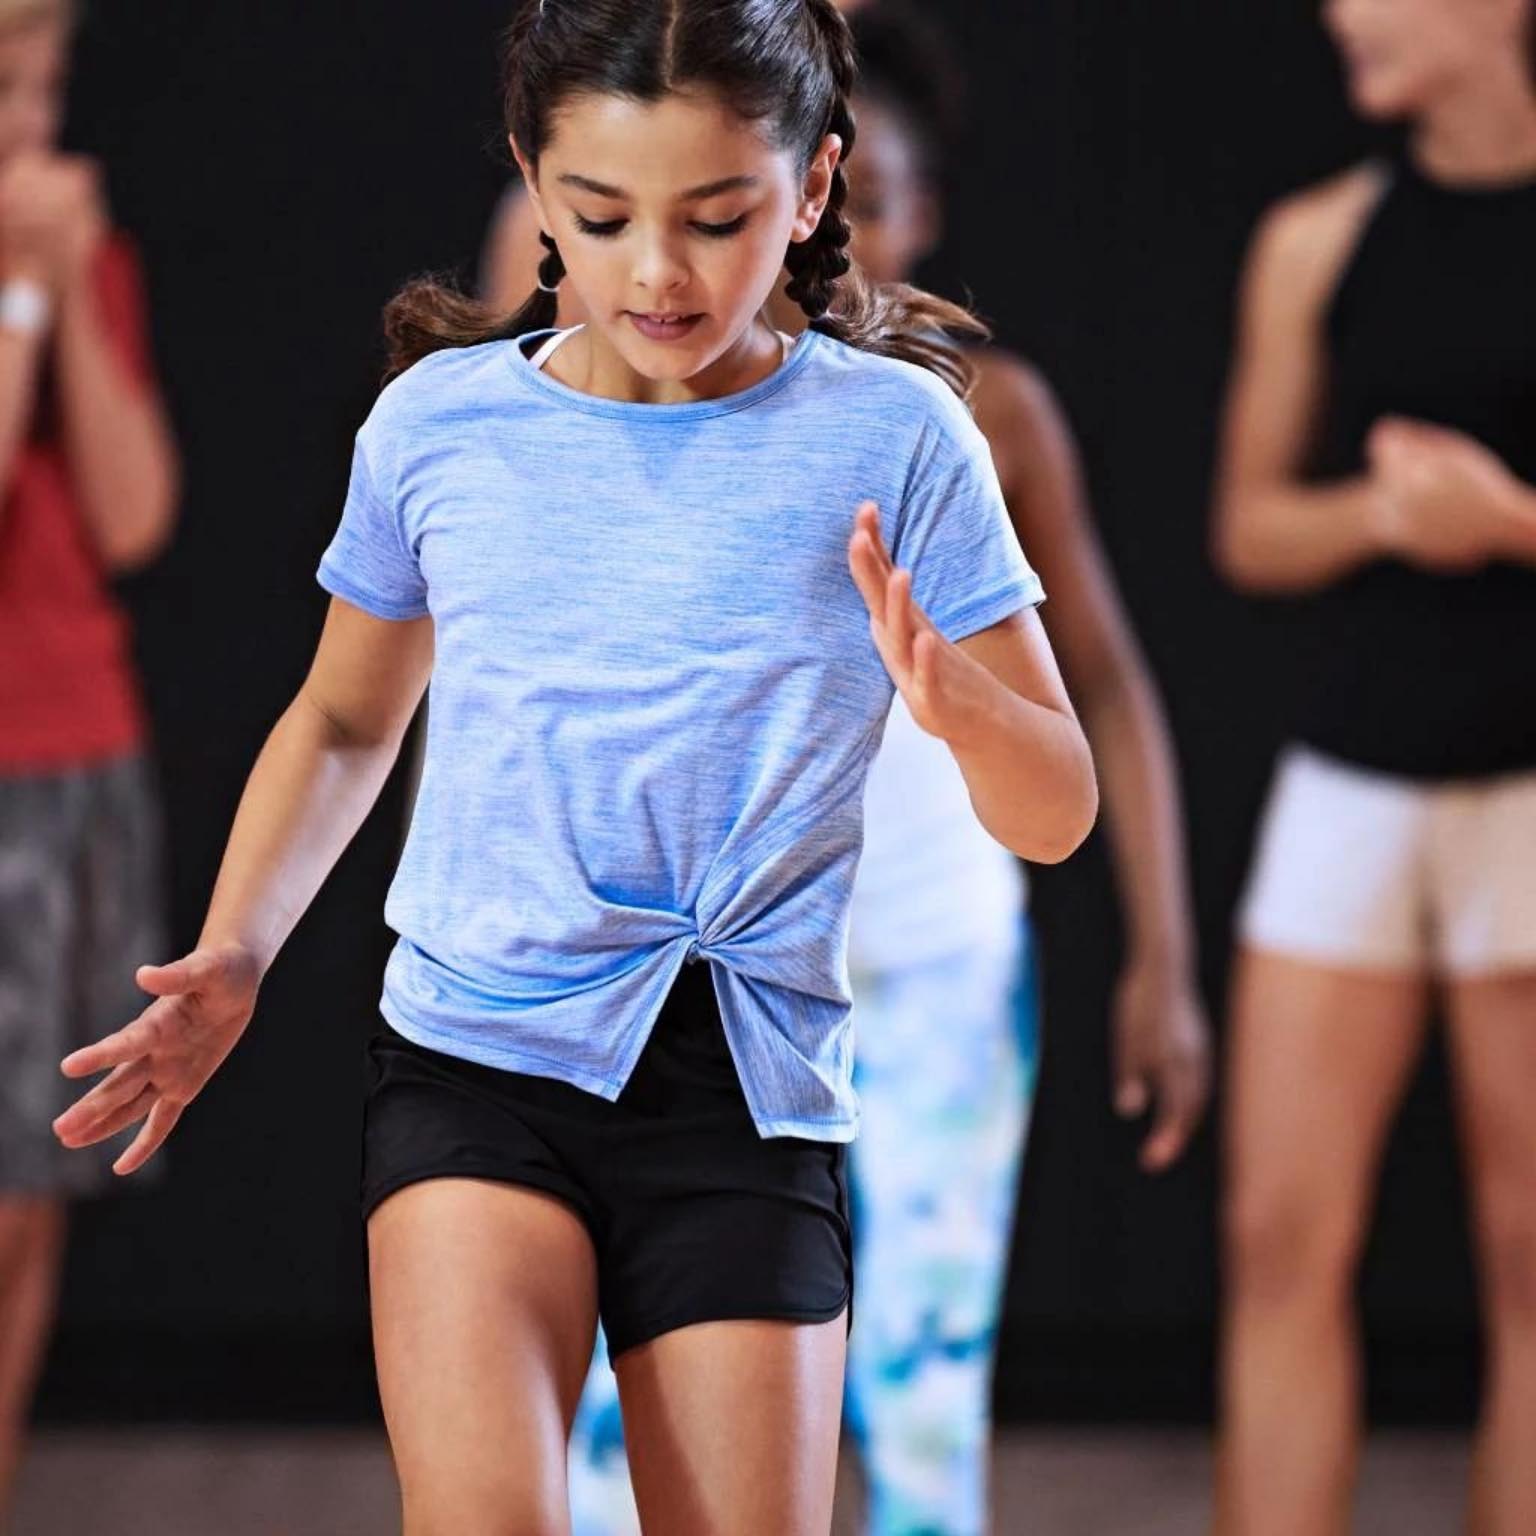 A young girl practicing footwork drills